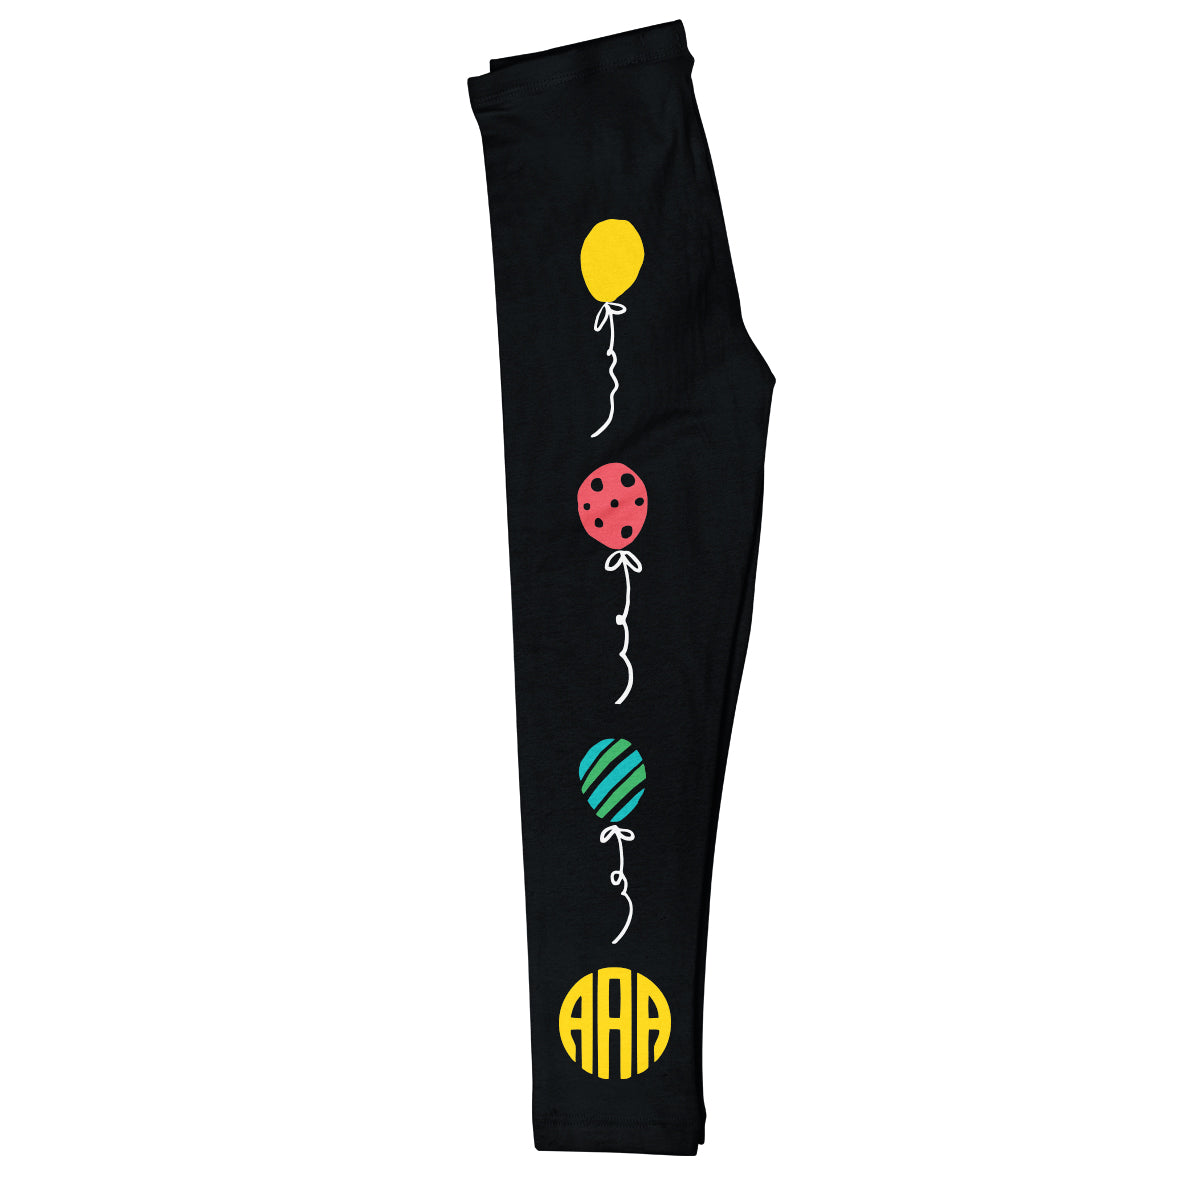 Black leggings with balloons and monogram - Wimziy&Co.